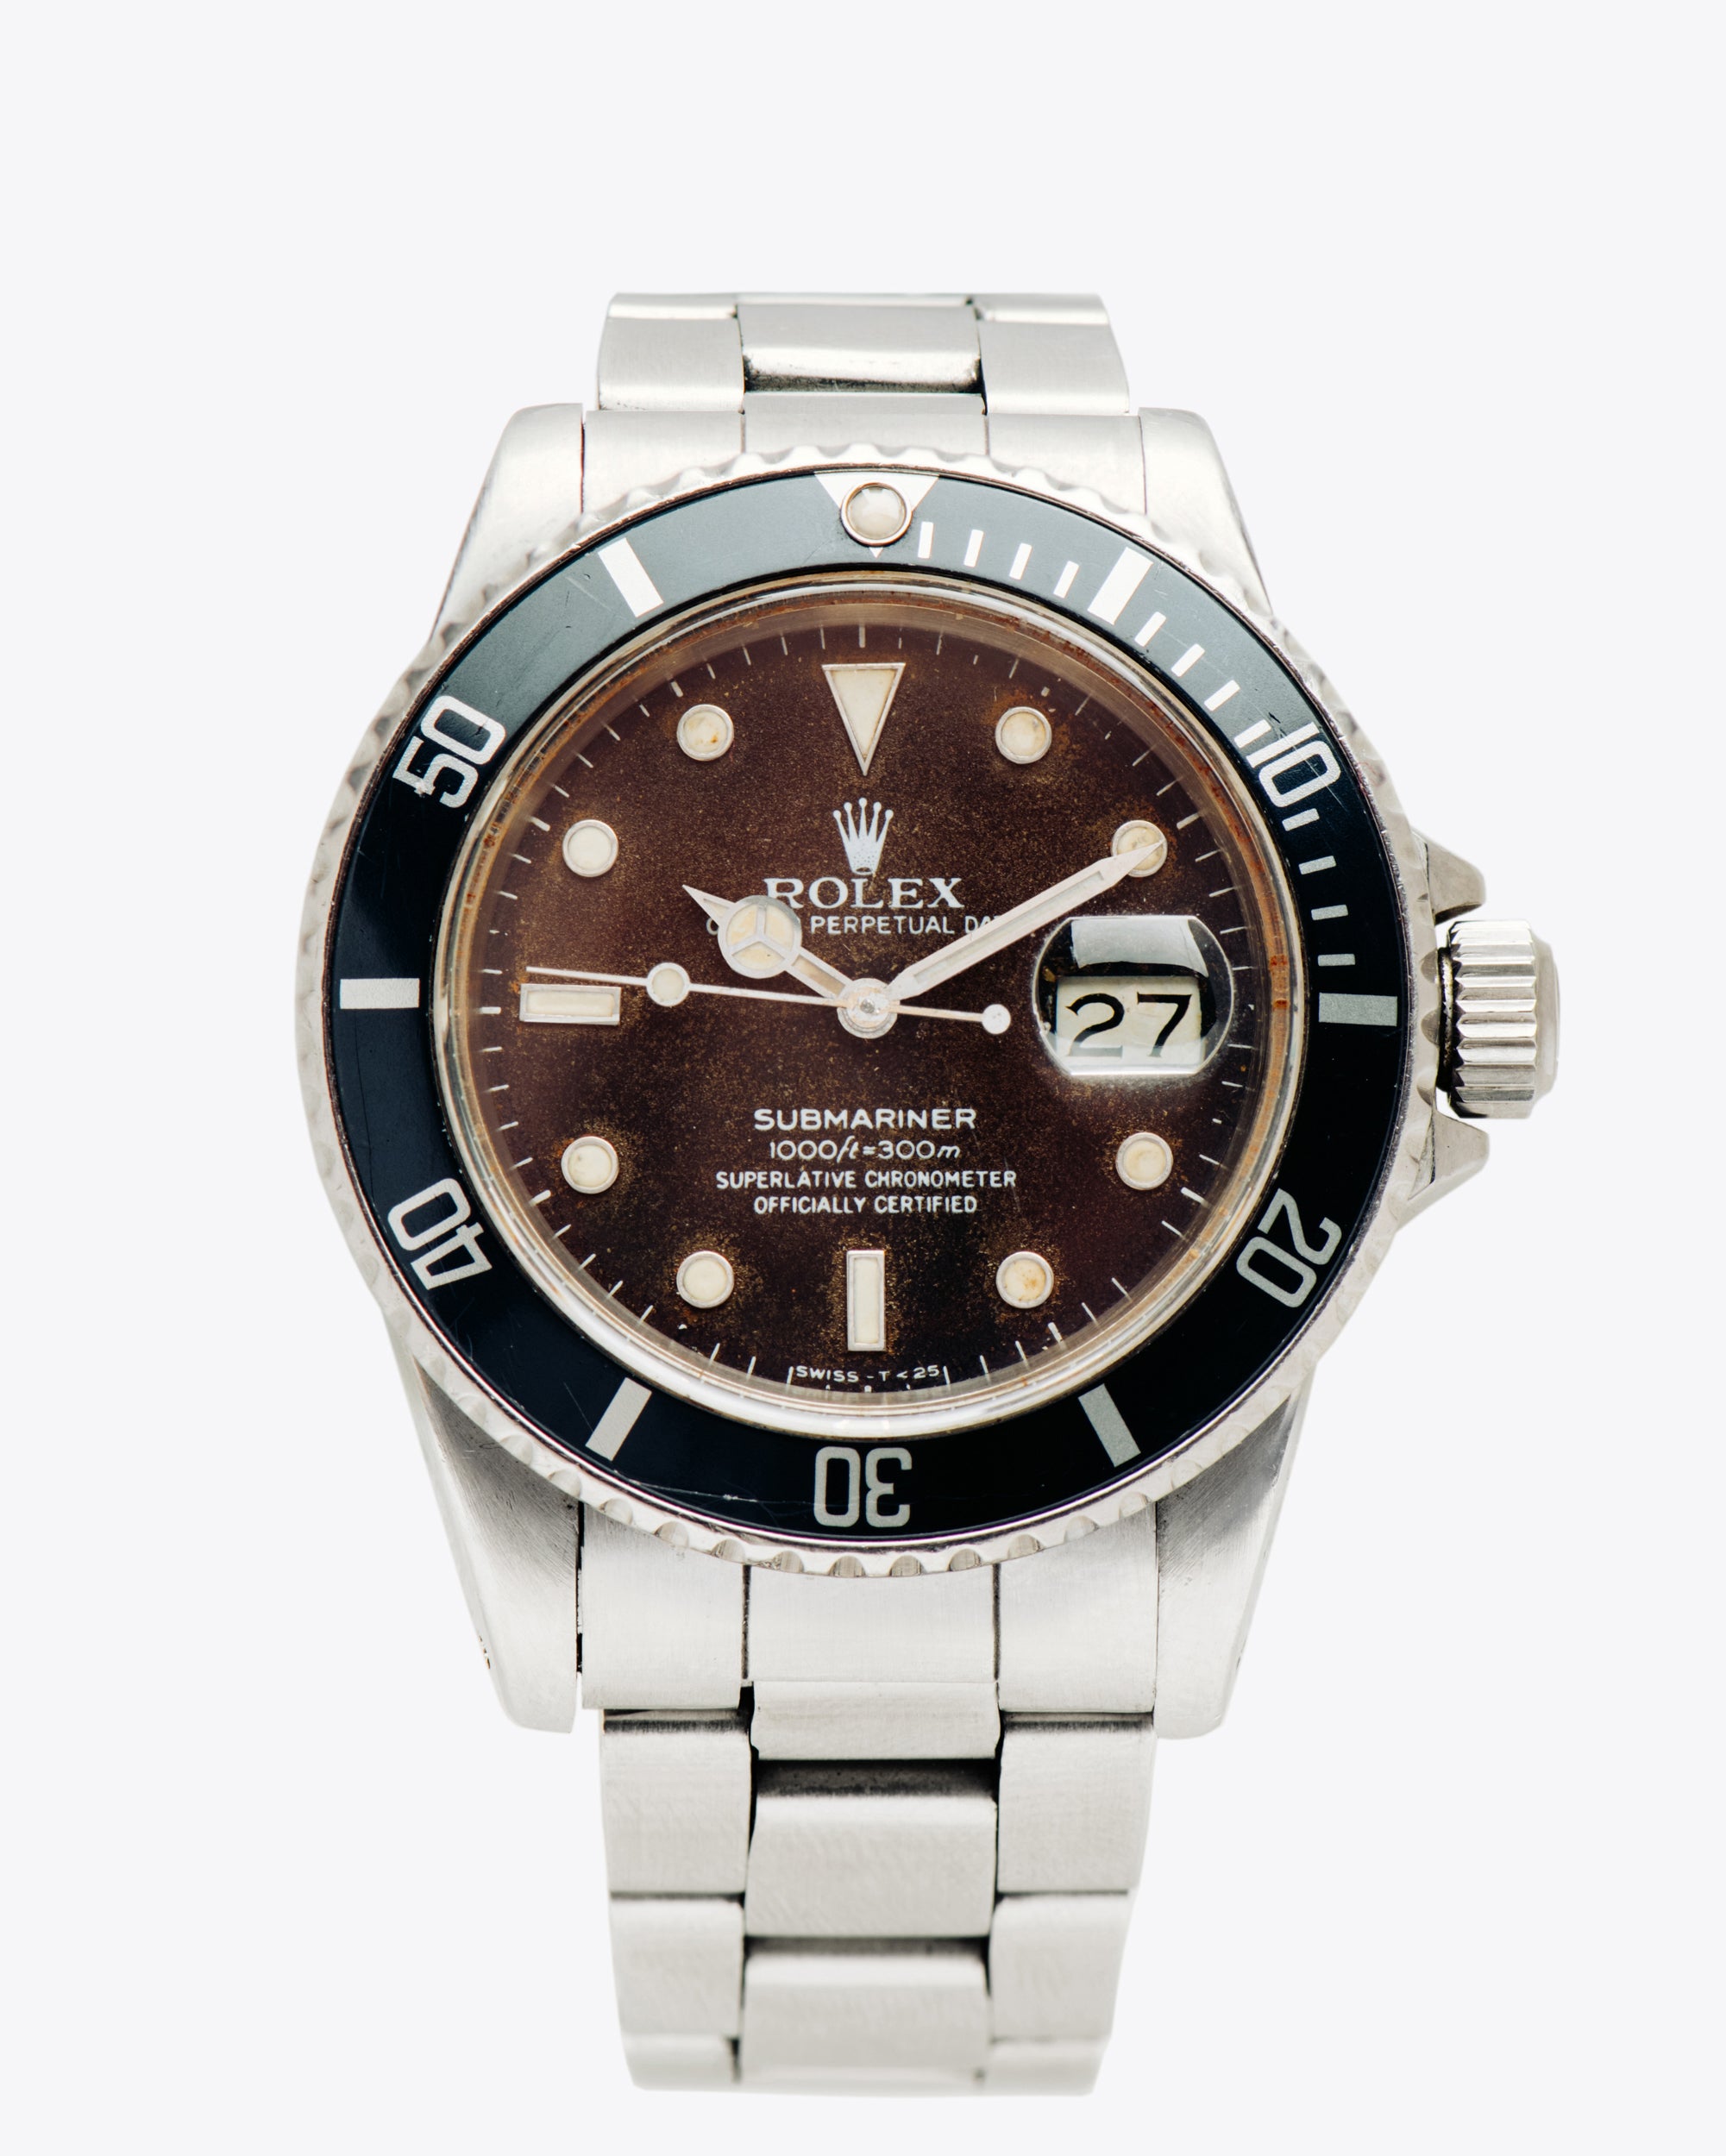 Rolex Submariner-Date 16800 Tropical Dial on Oyster Bracelet – Pcs Man of the World